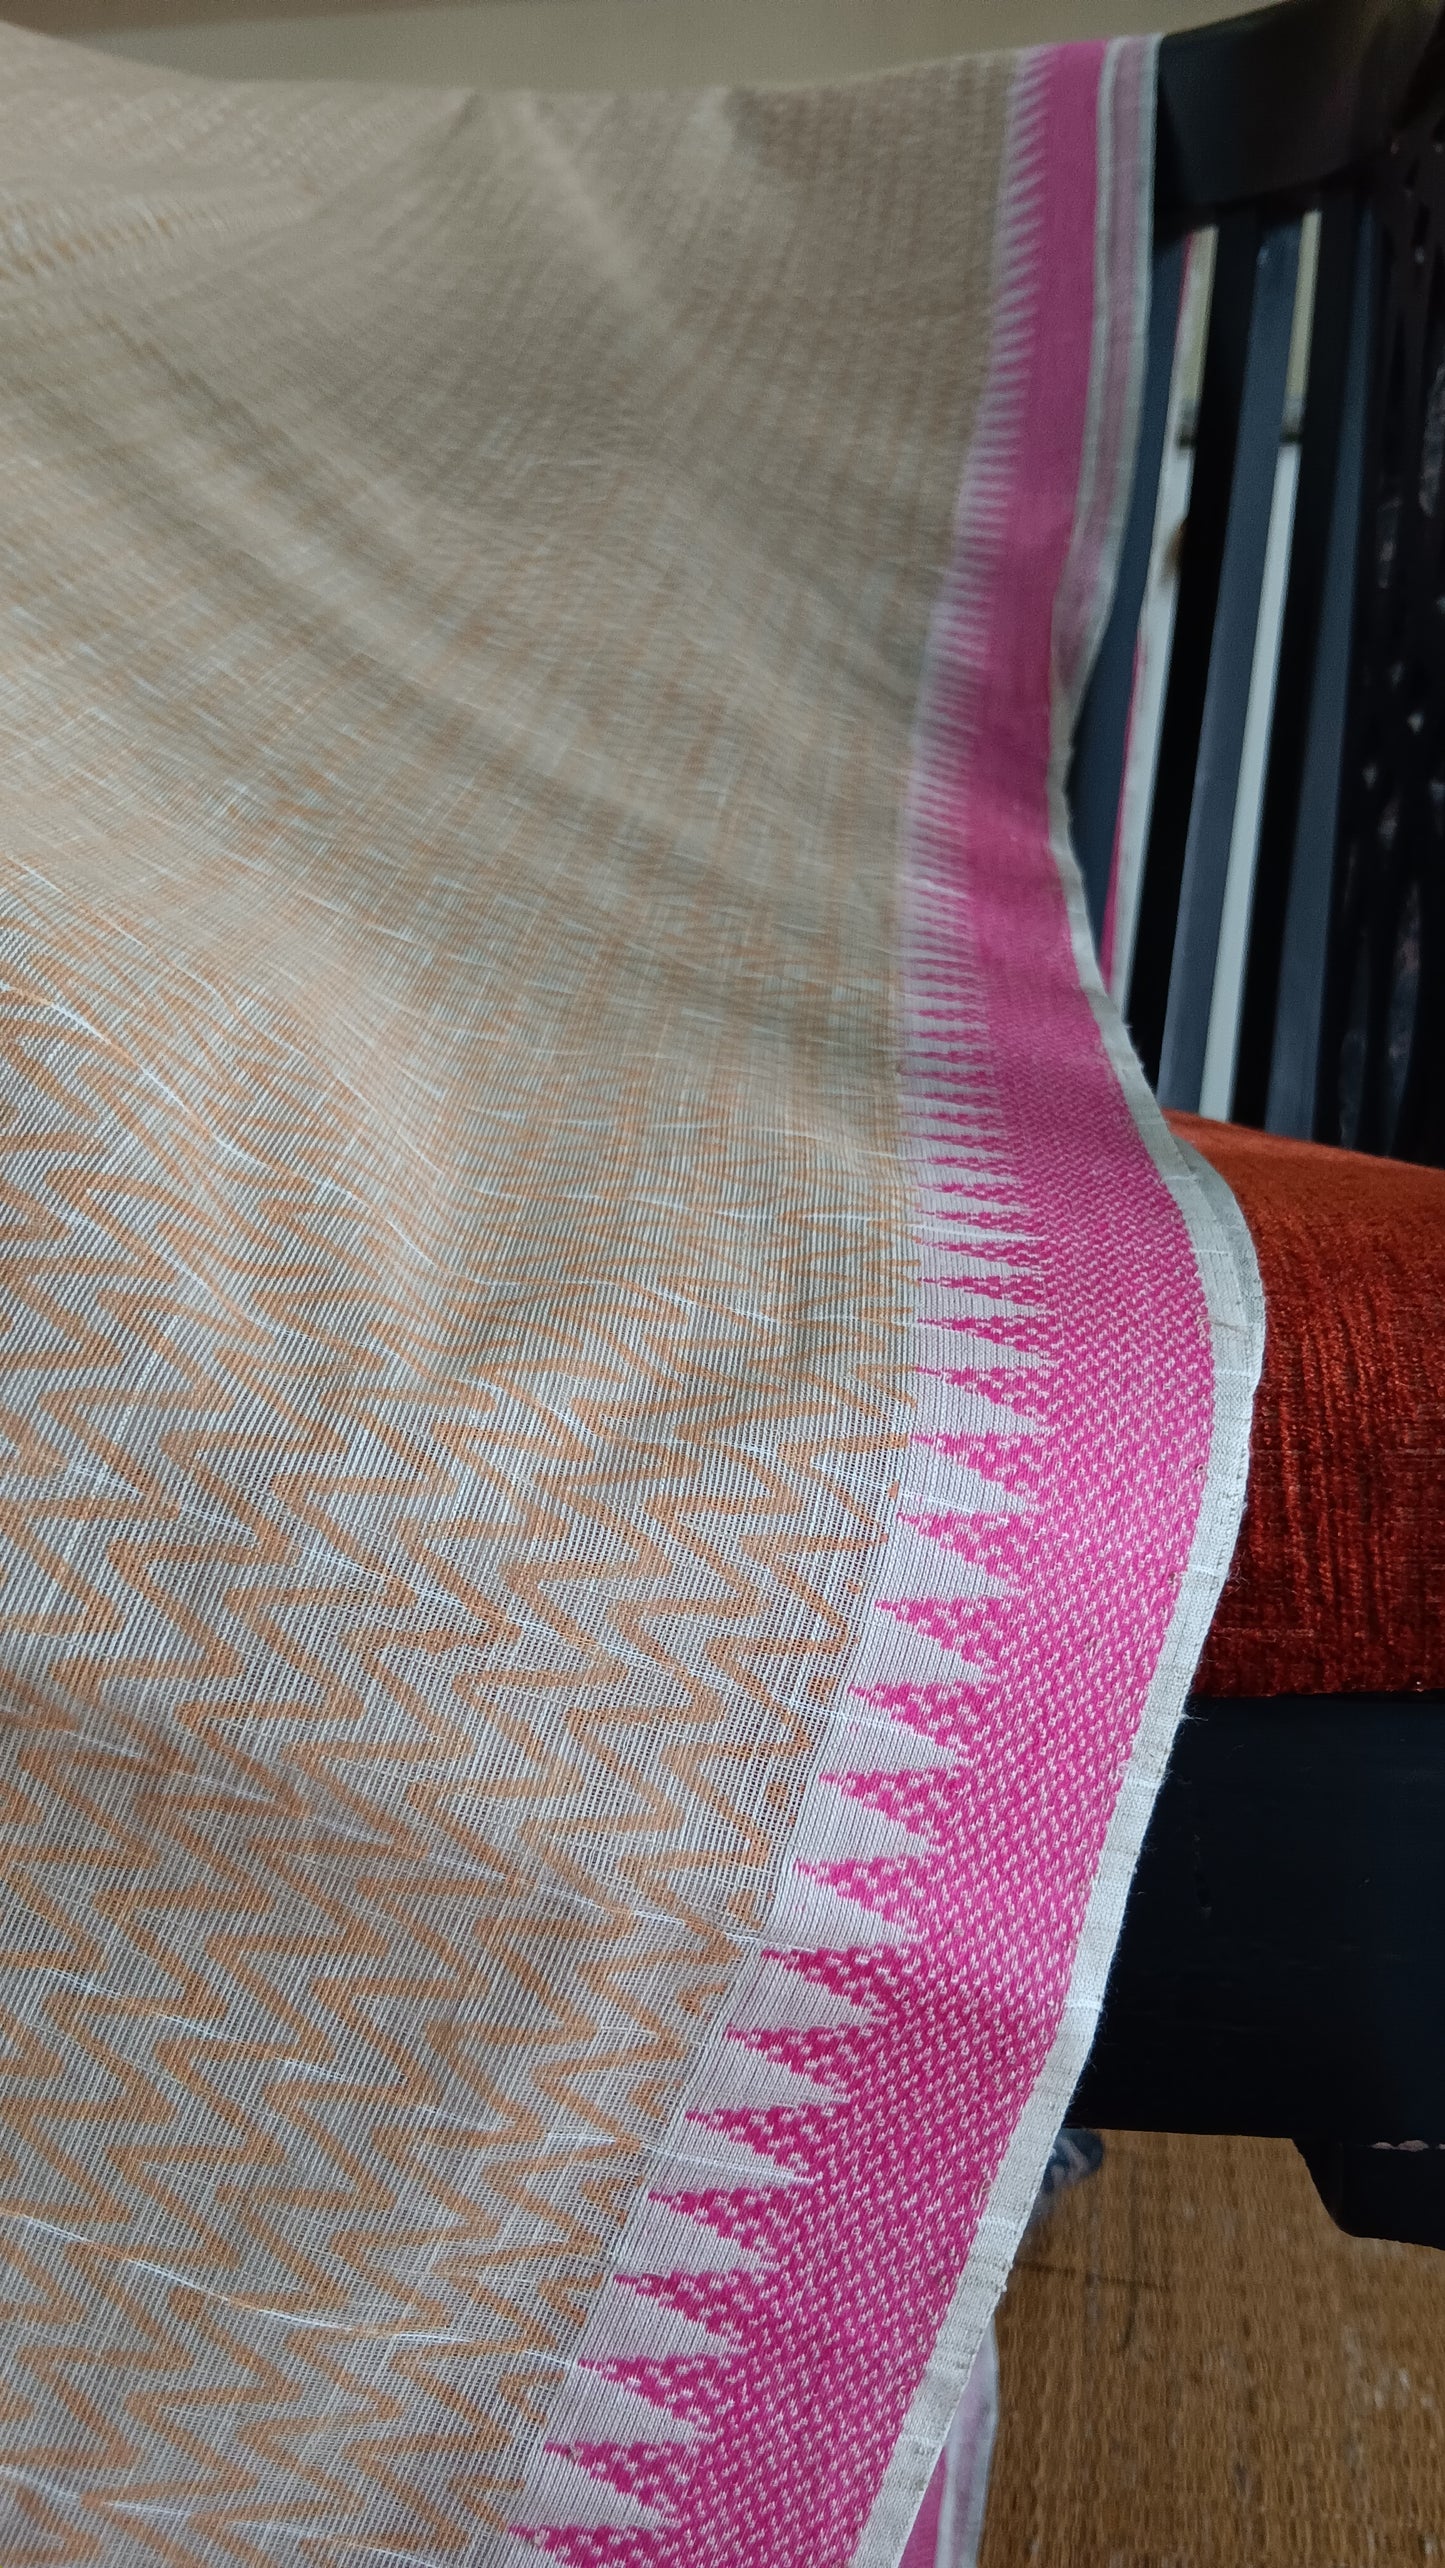 close up view of the woven pink thread border of a daily wear cotton saree